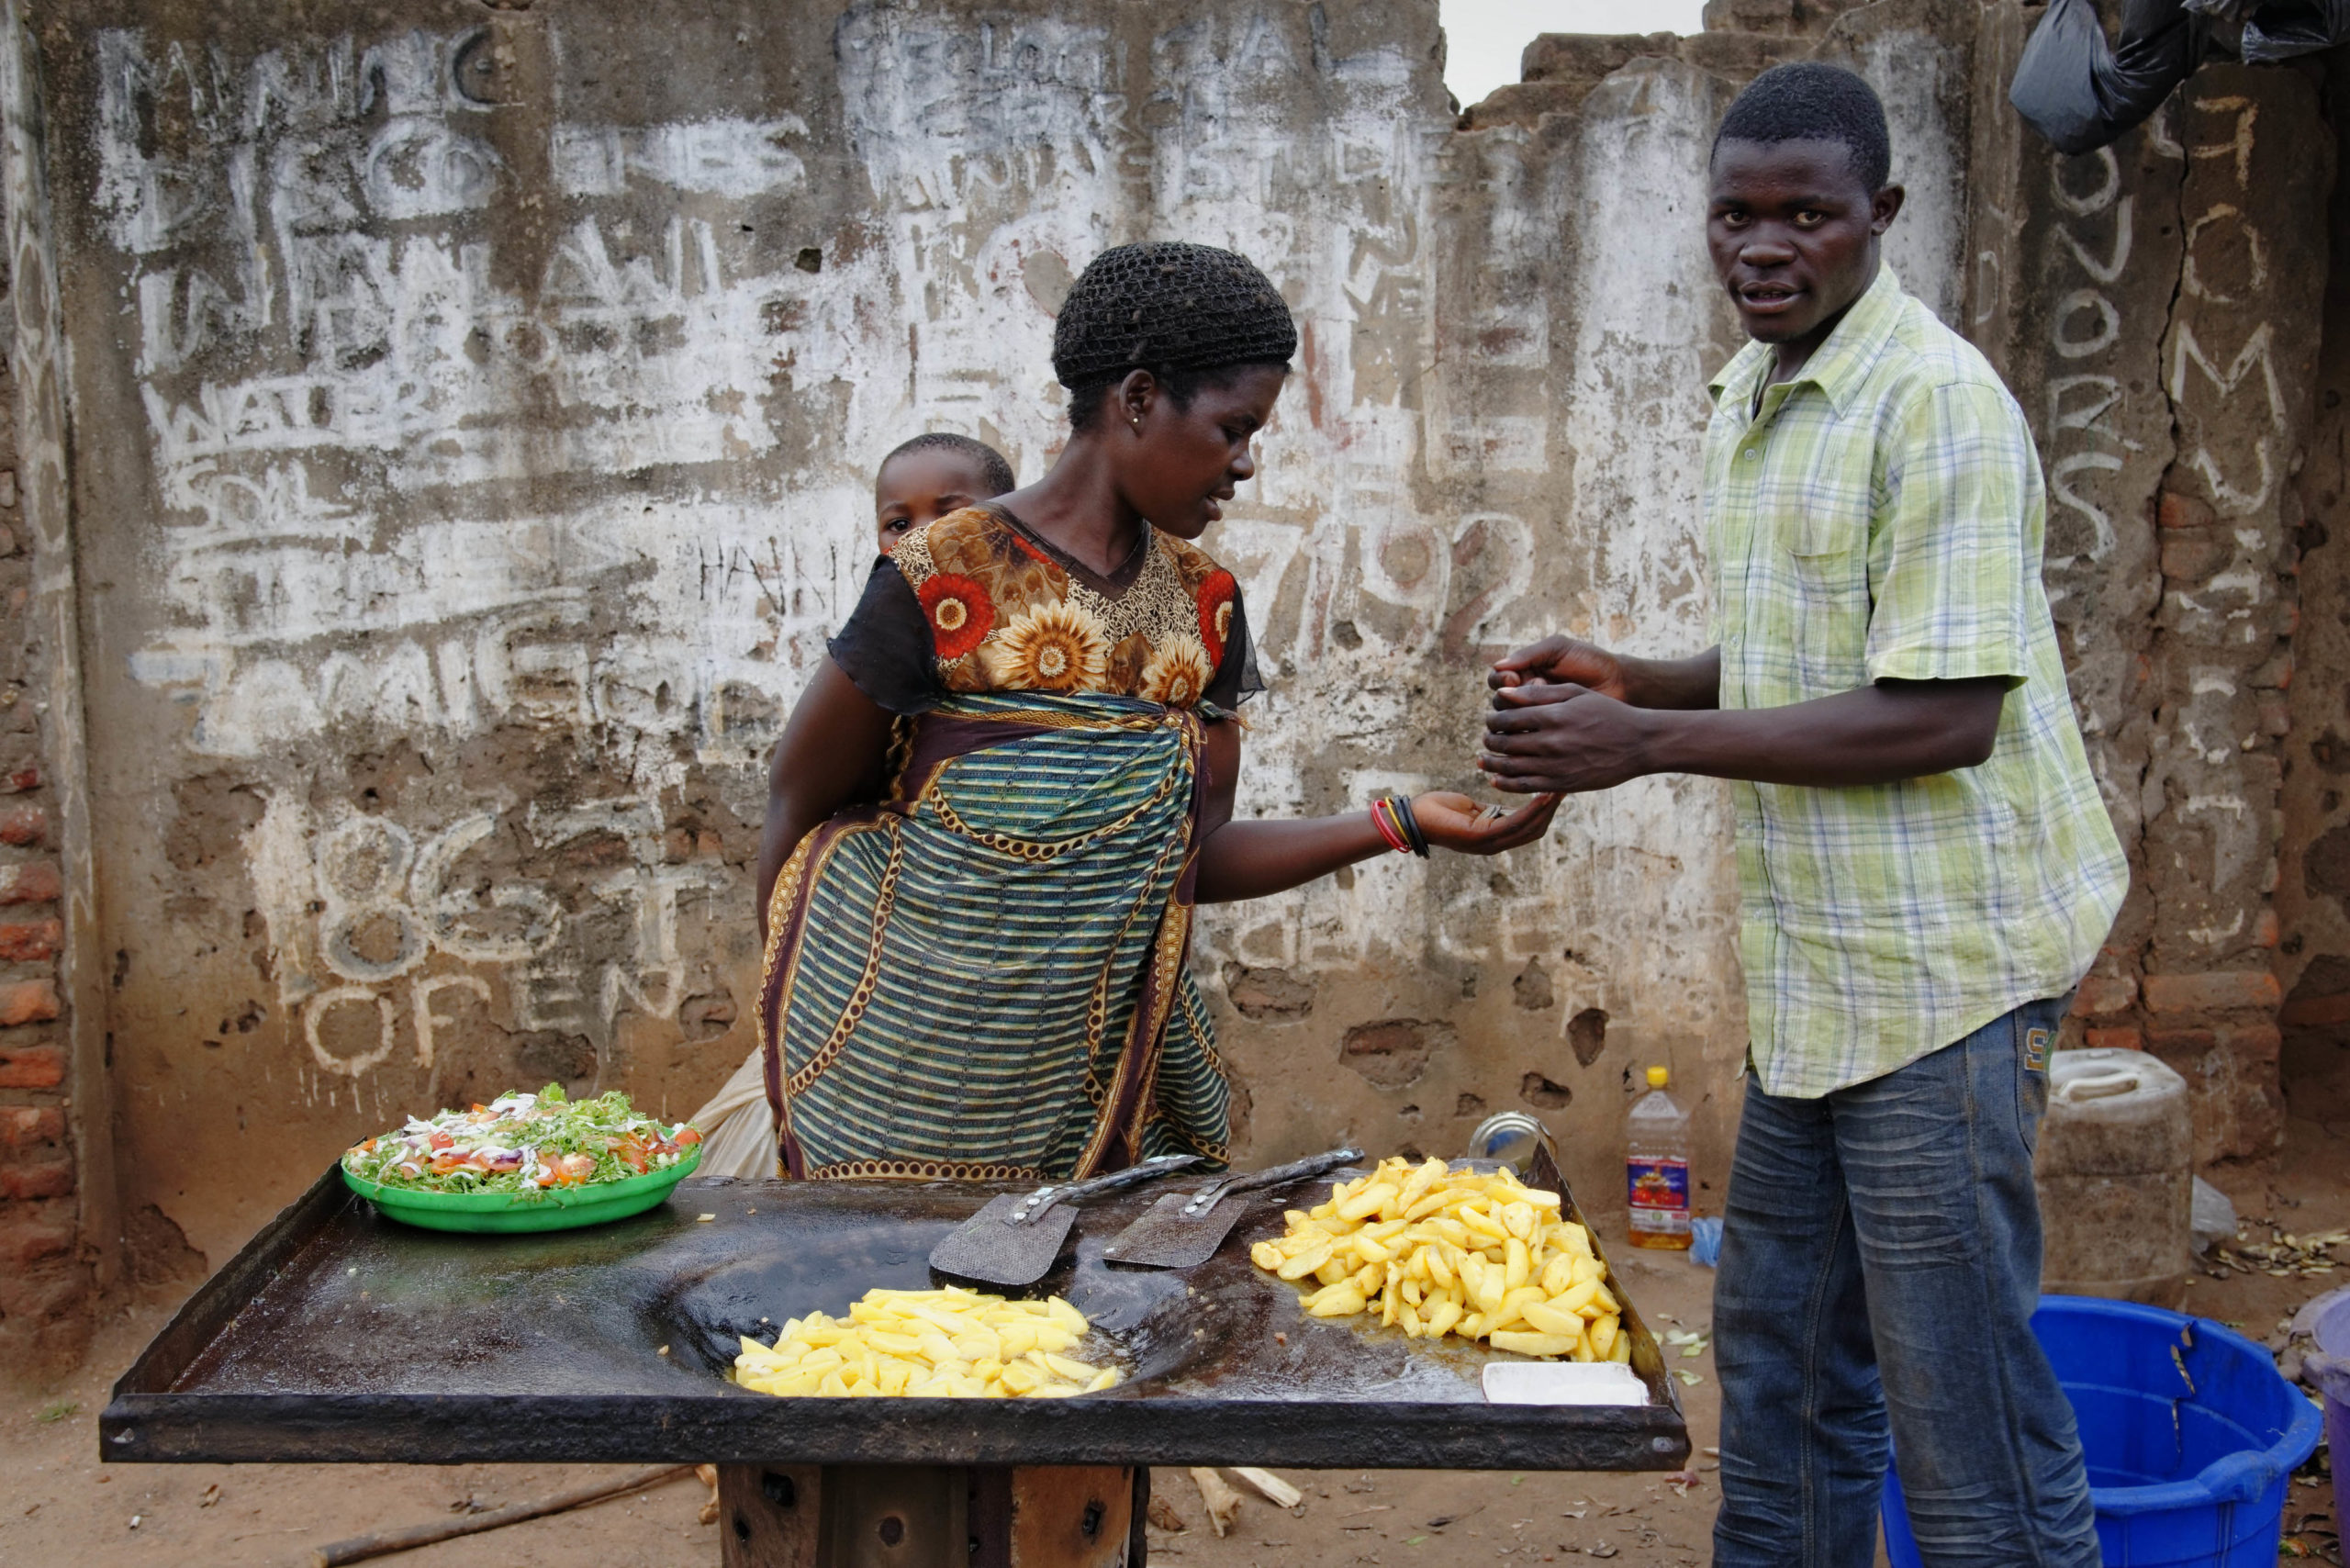 A woman carries her young son as she sells food at a market in Malawi's capital Lilongwe